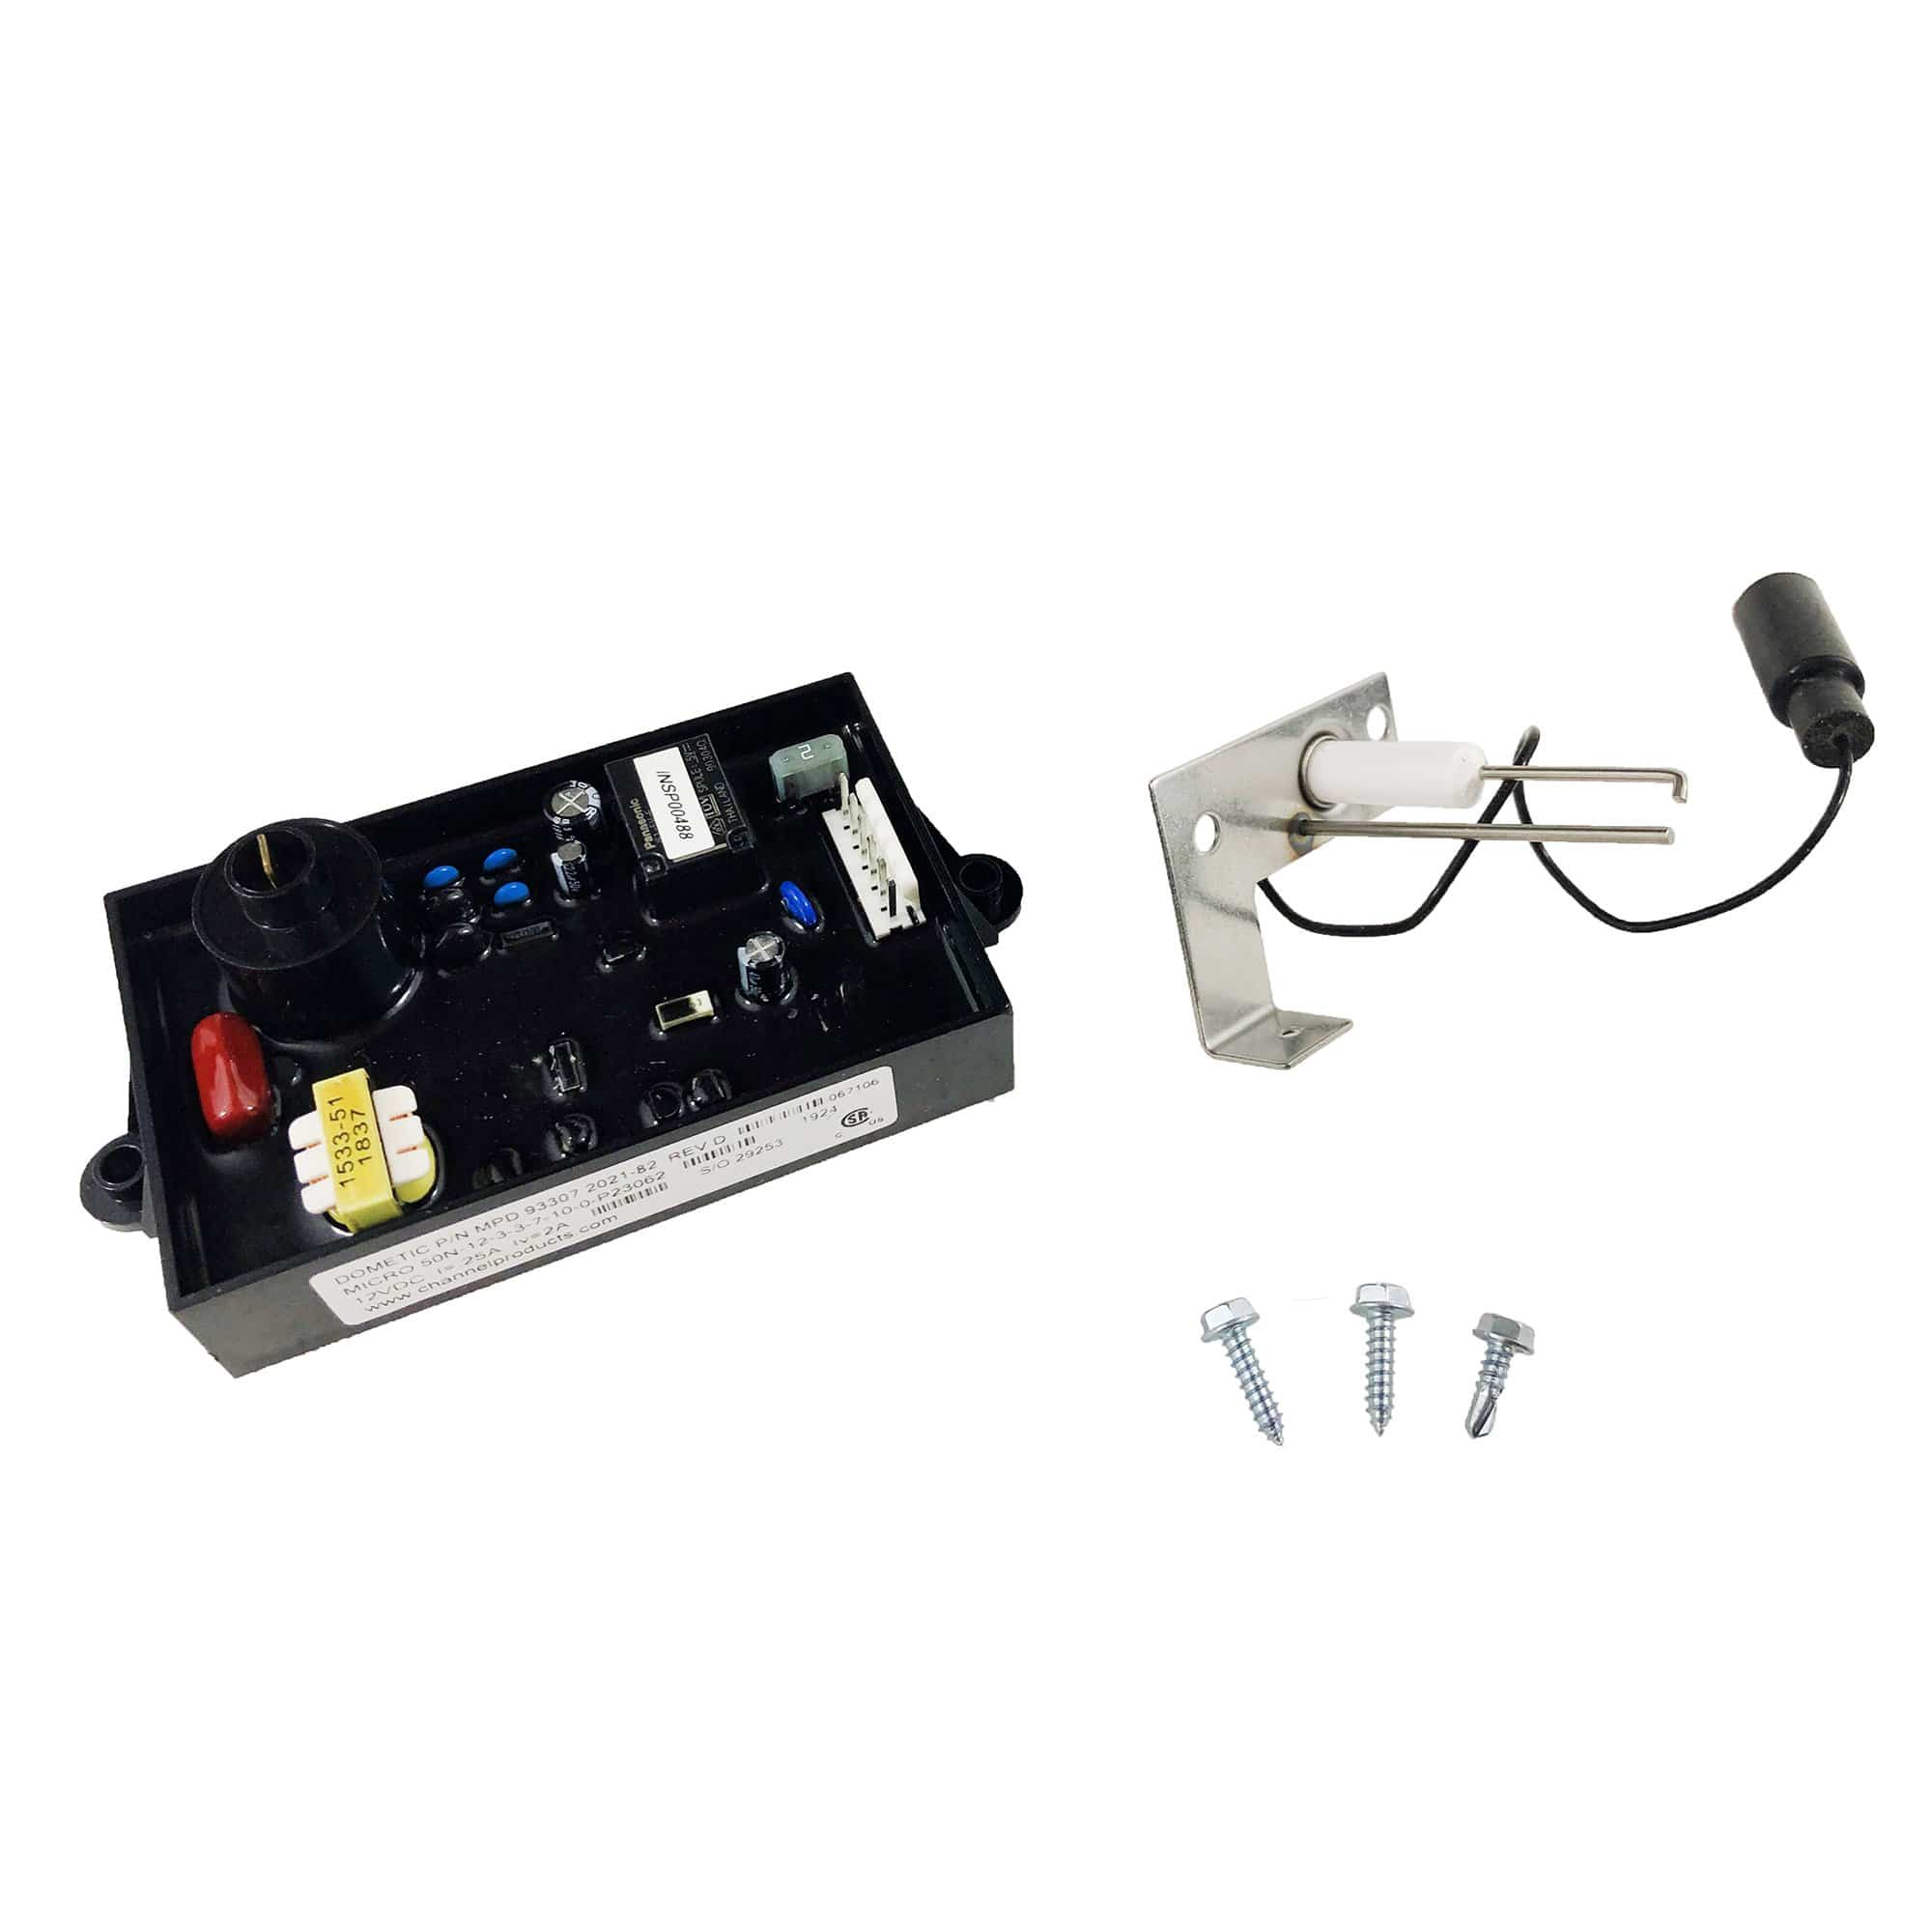 Atwood 91363 Universal Ignition Control Kit Circuit Board